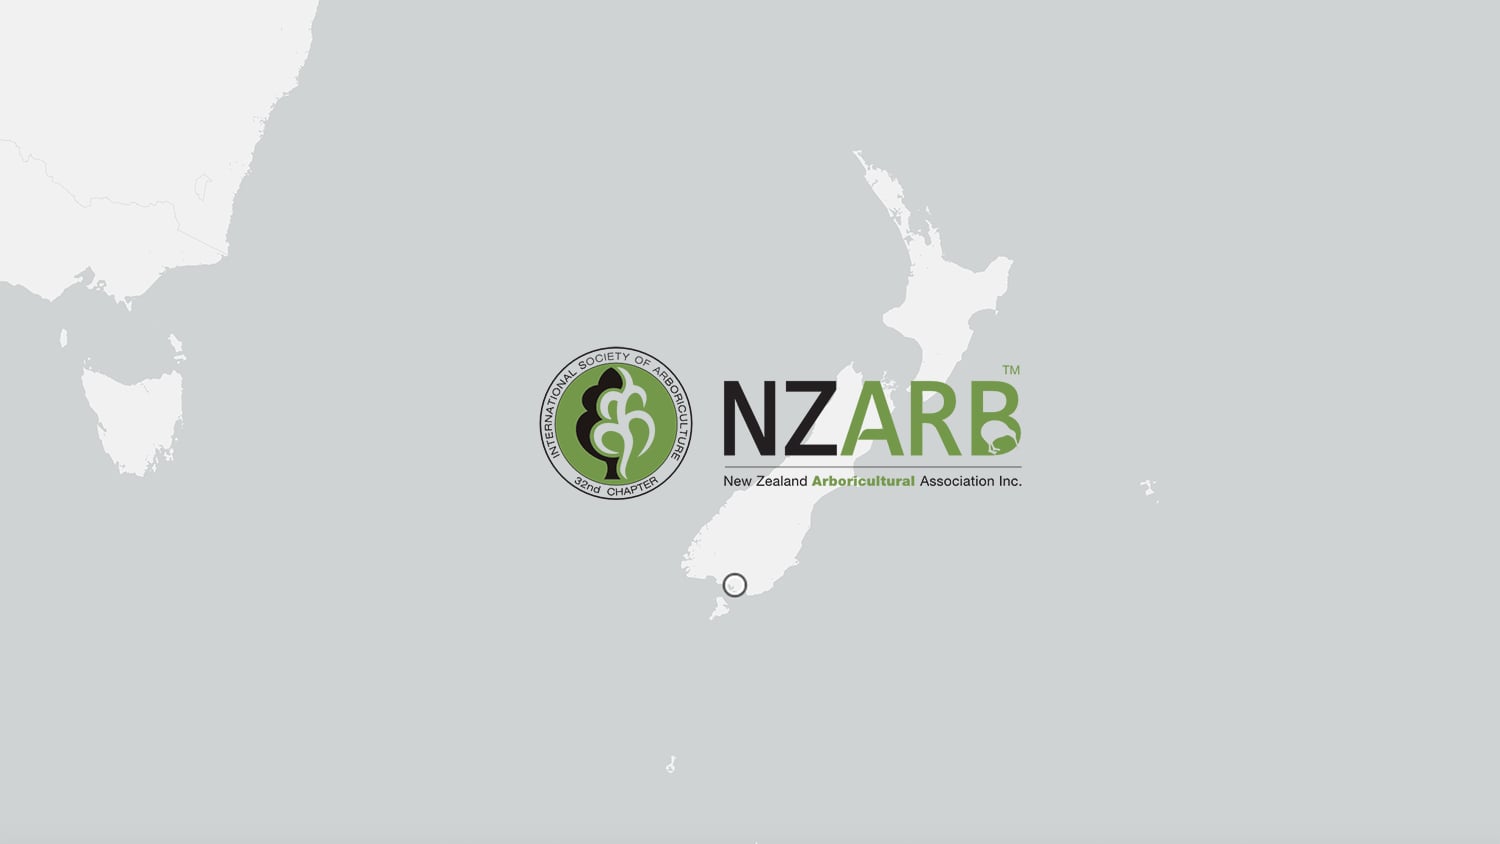 NZ Arb Annual Conference 2023 in Invercargill, New Zealand, with Eos Postioning Systems and New Zealand Arboricultural Association